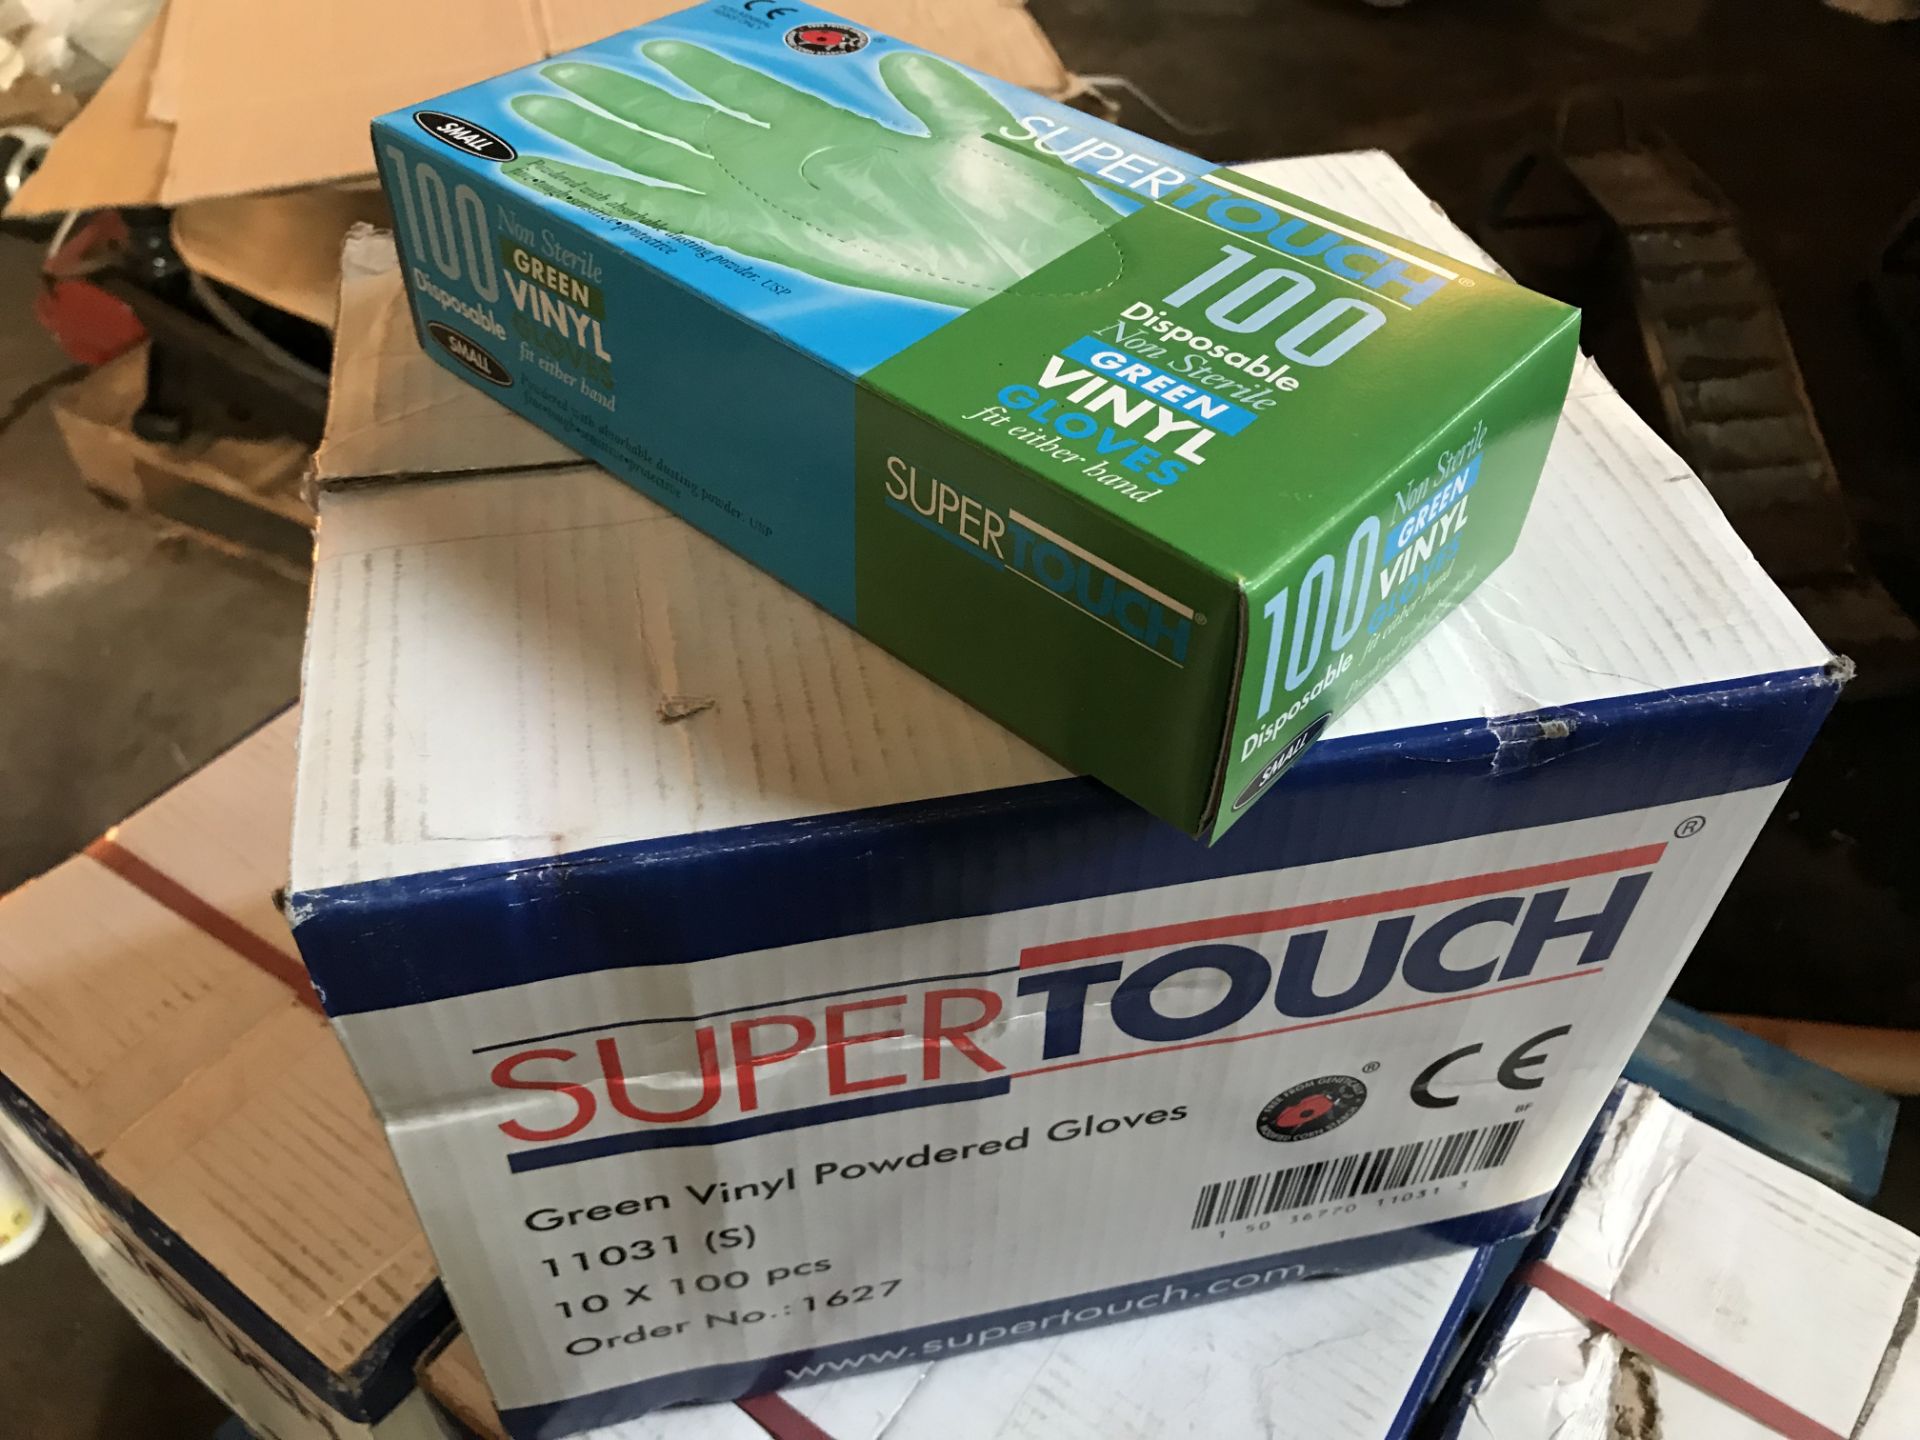 18,000 SUPERTOUCH POWDER FREE VINYL SMALL GLOVES - Image 4 of 5